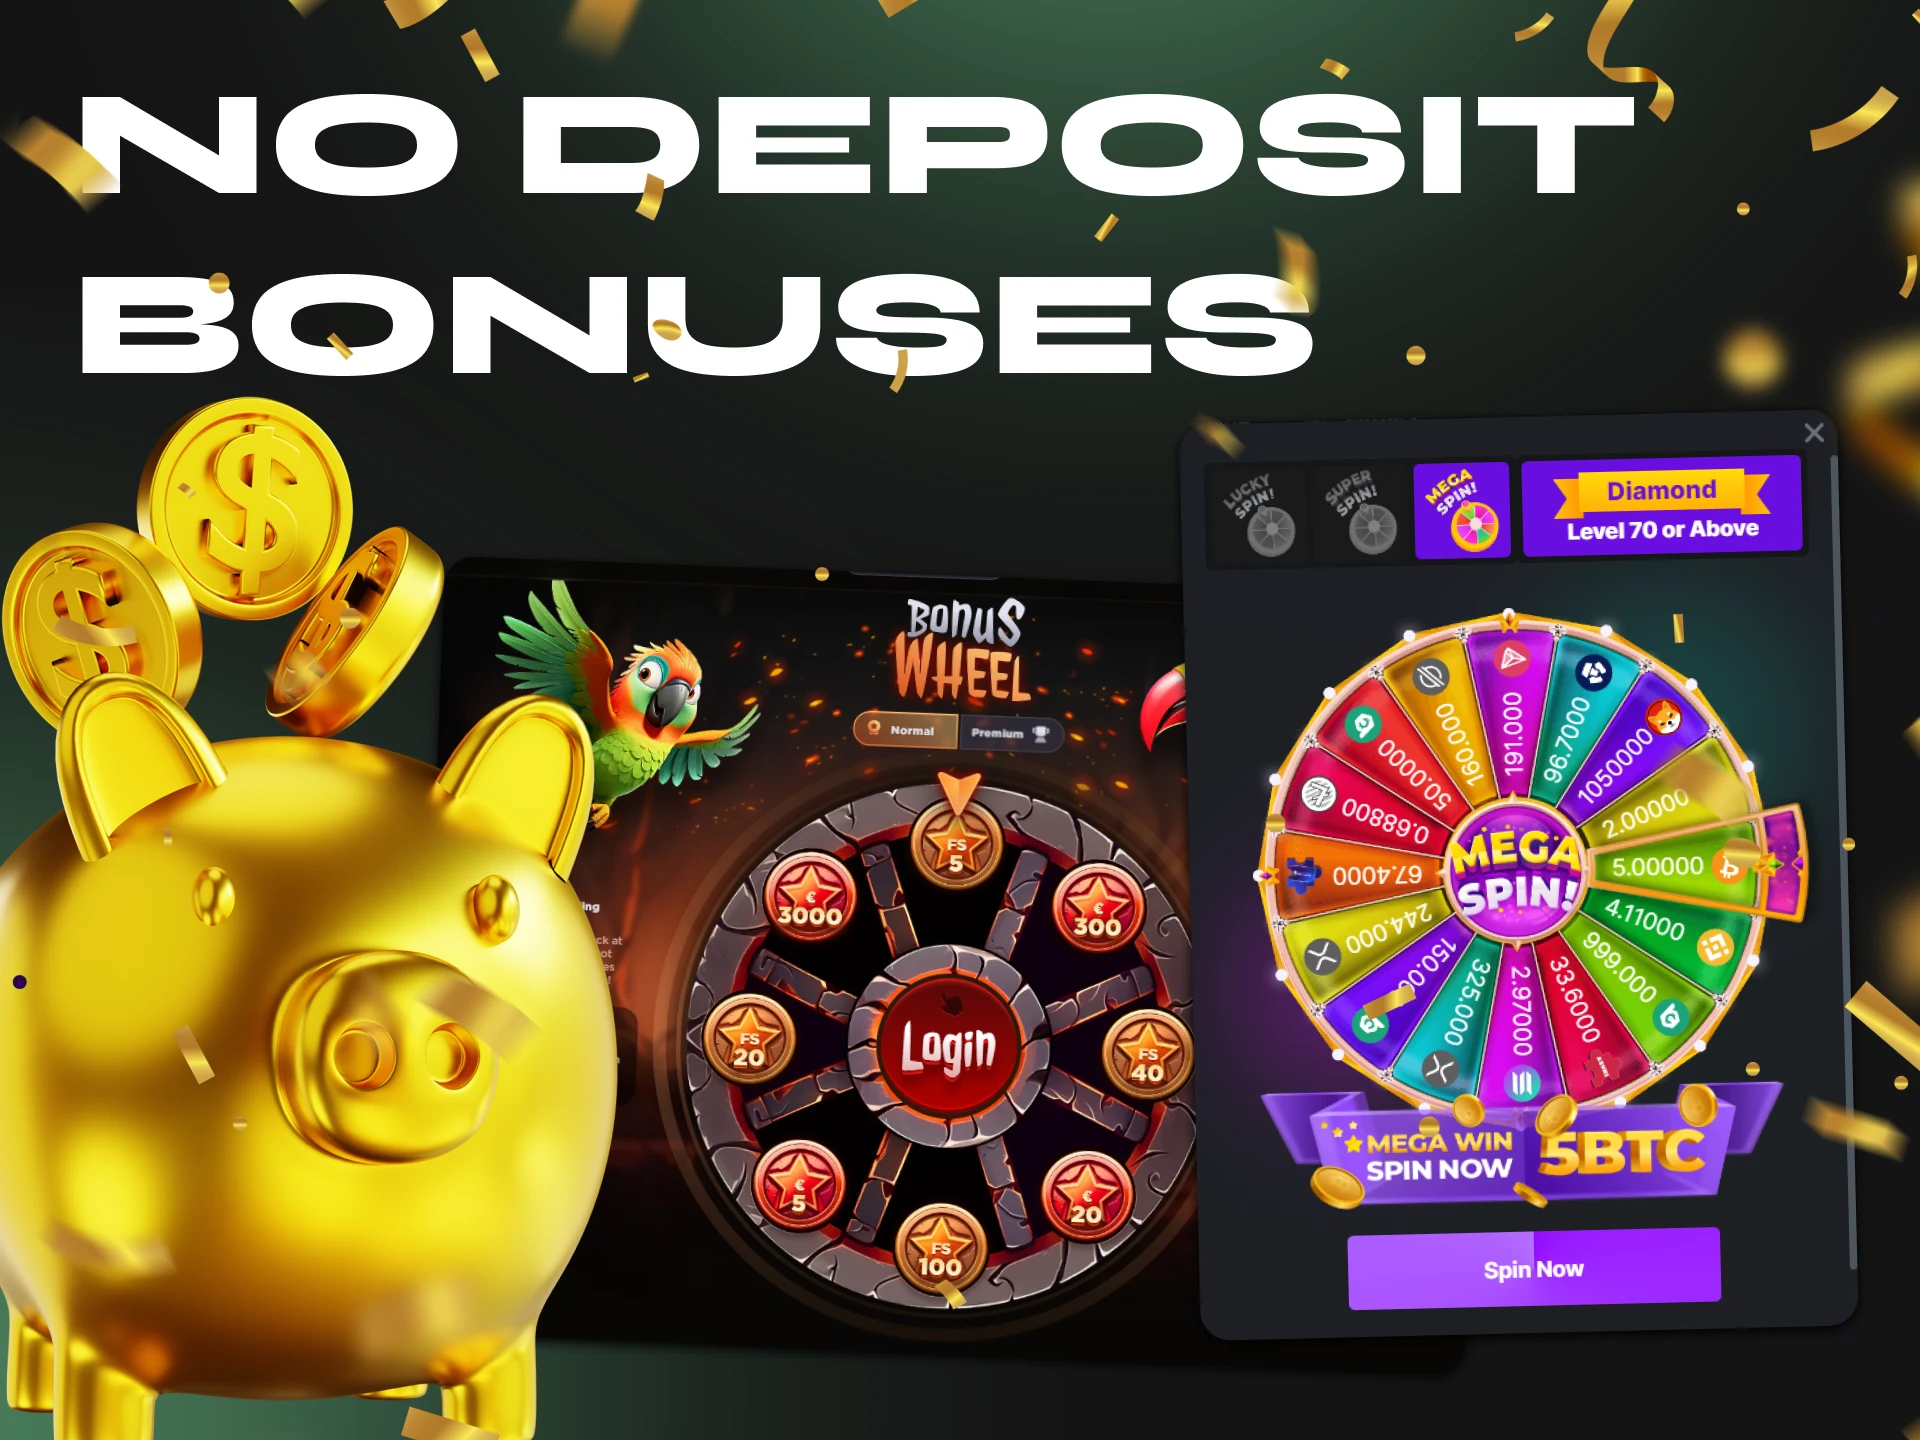 Use your no deposit bonus and spend it on playing poker.